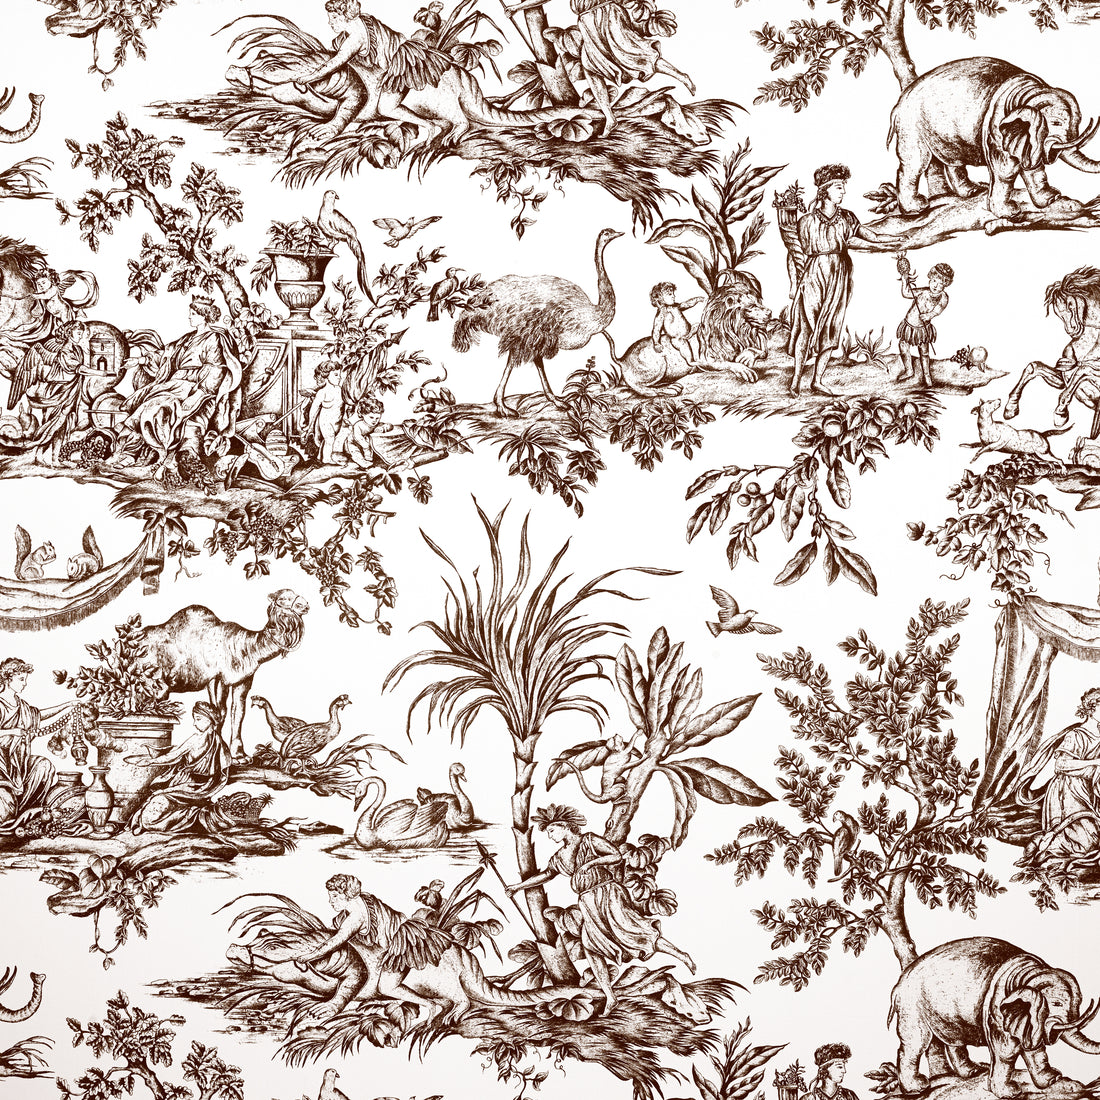 Antilles Toile fabric in brown color - pattern number AF15169 - by Anna French in the Antilles collection